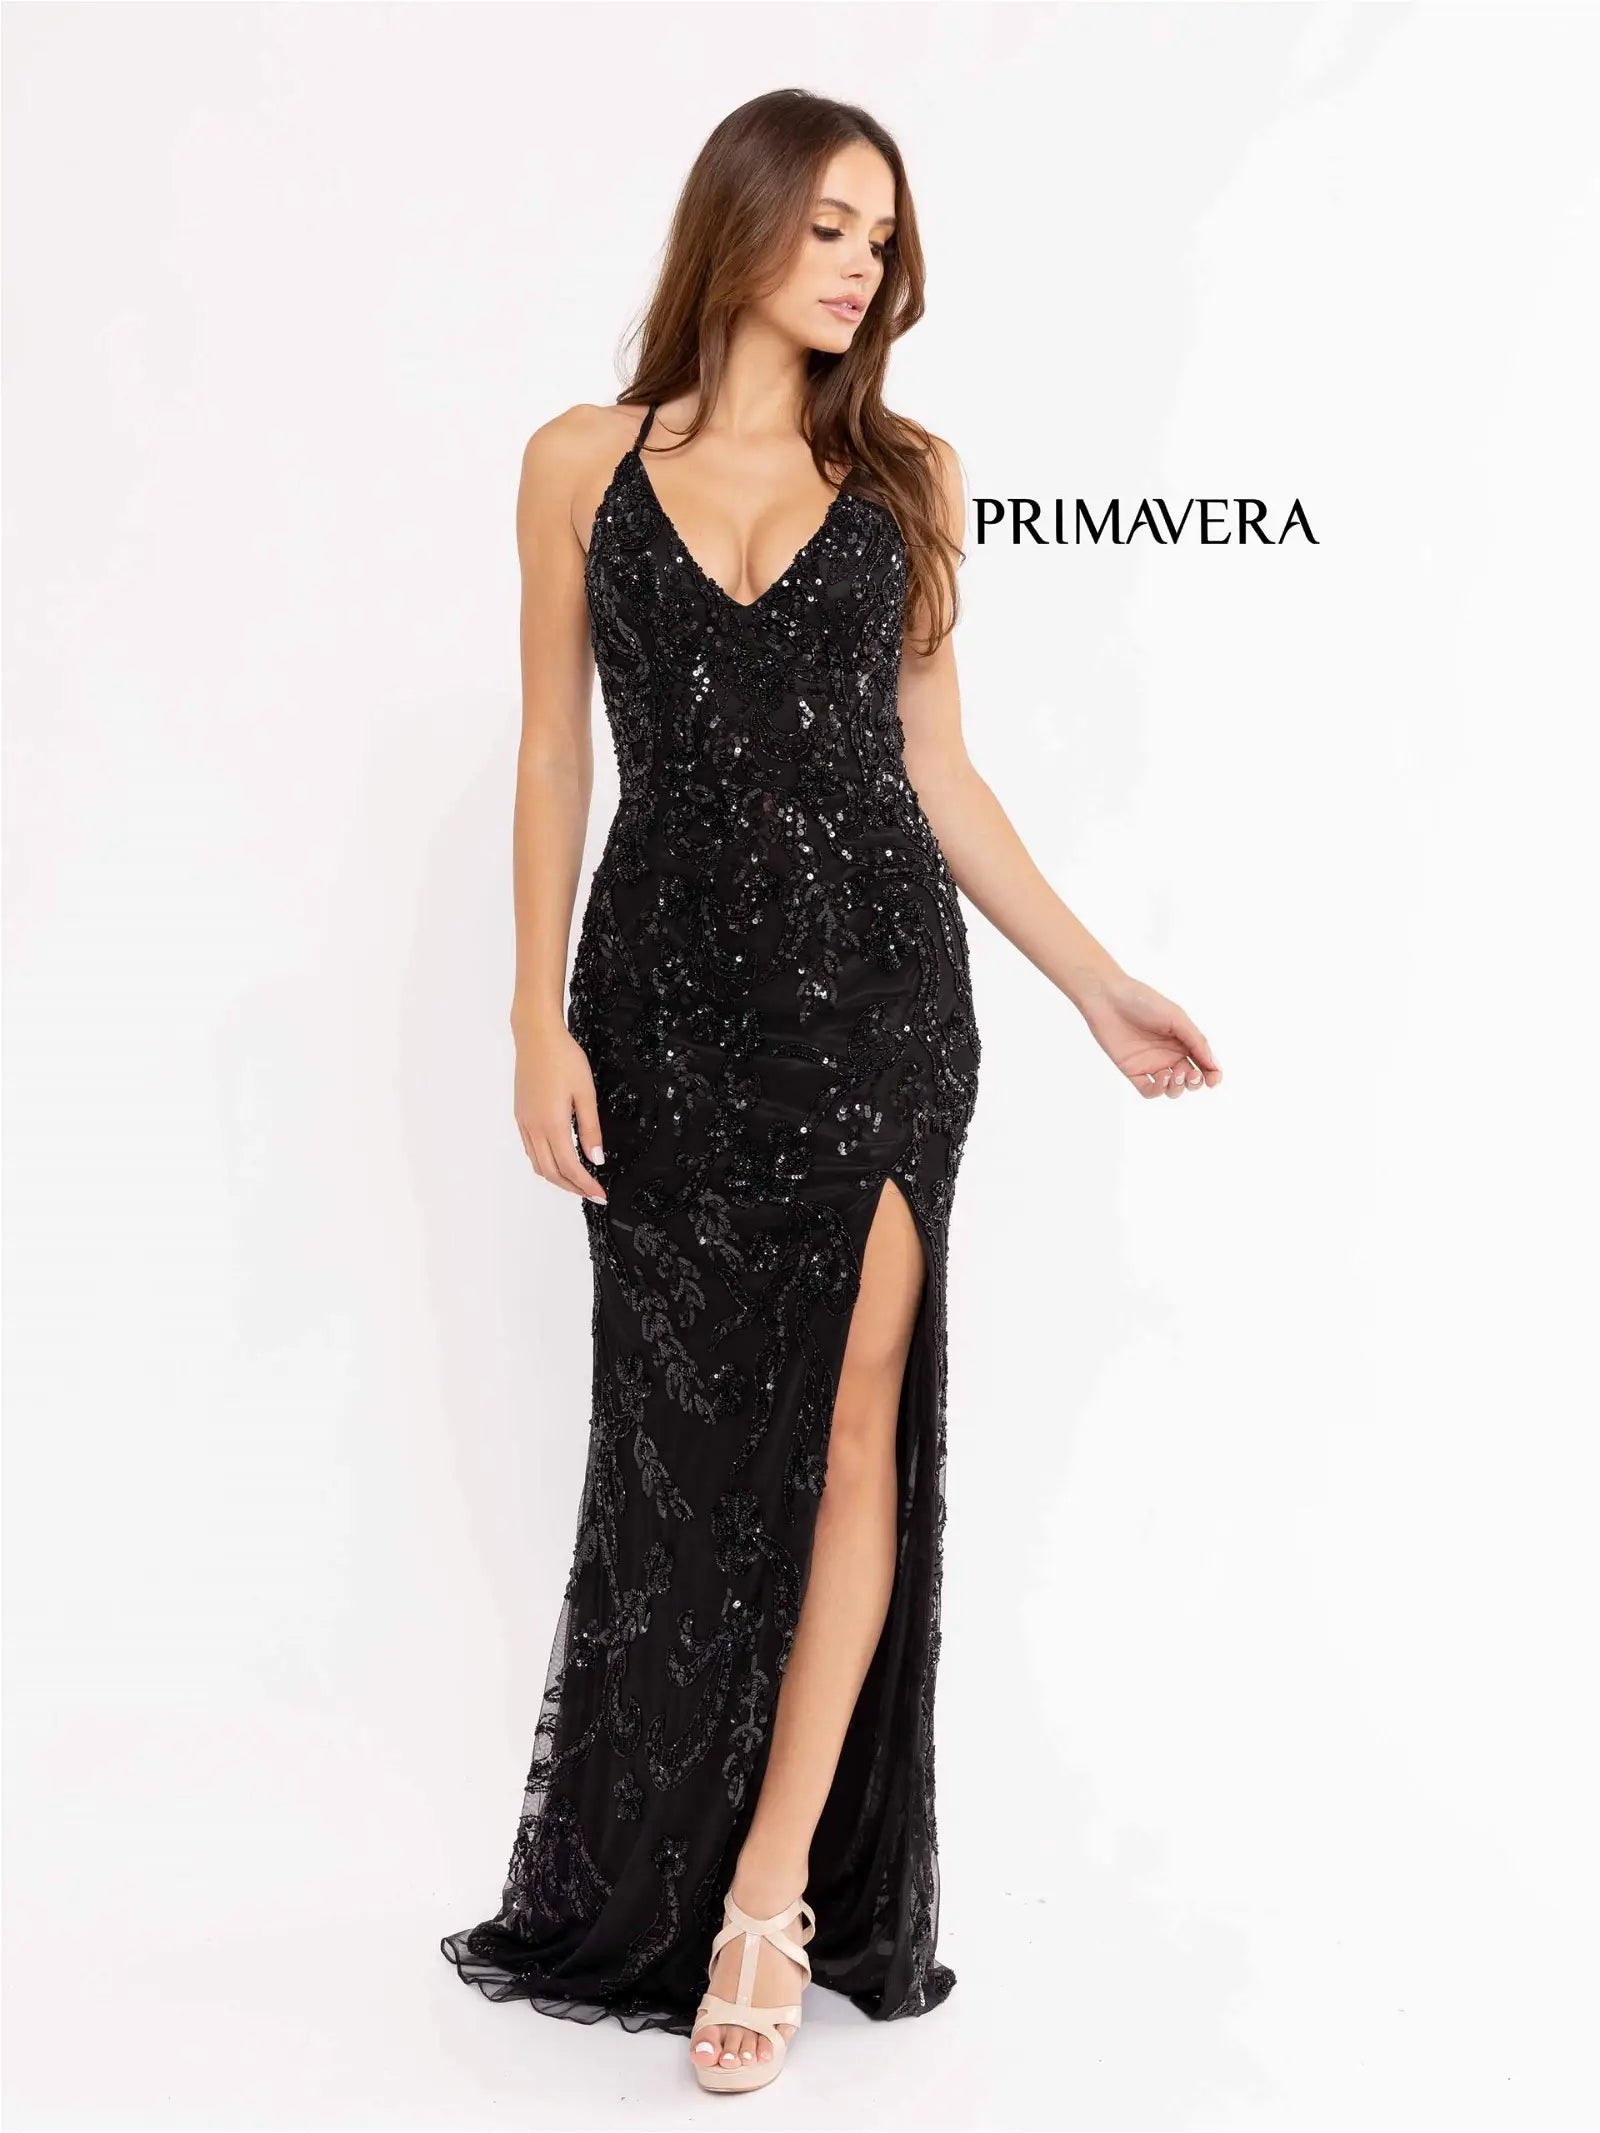 Primavera Couture 3950 Prom Dress Long Beaded Gown. Such  a gorgeous gown with a design.  